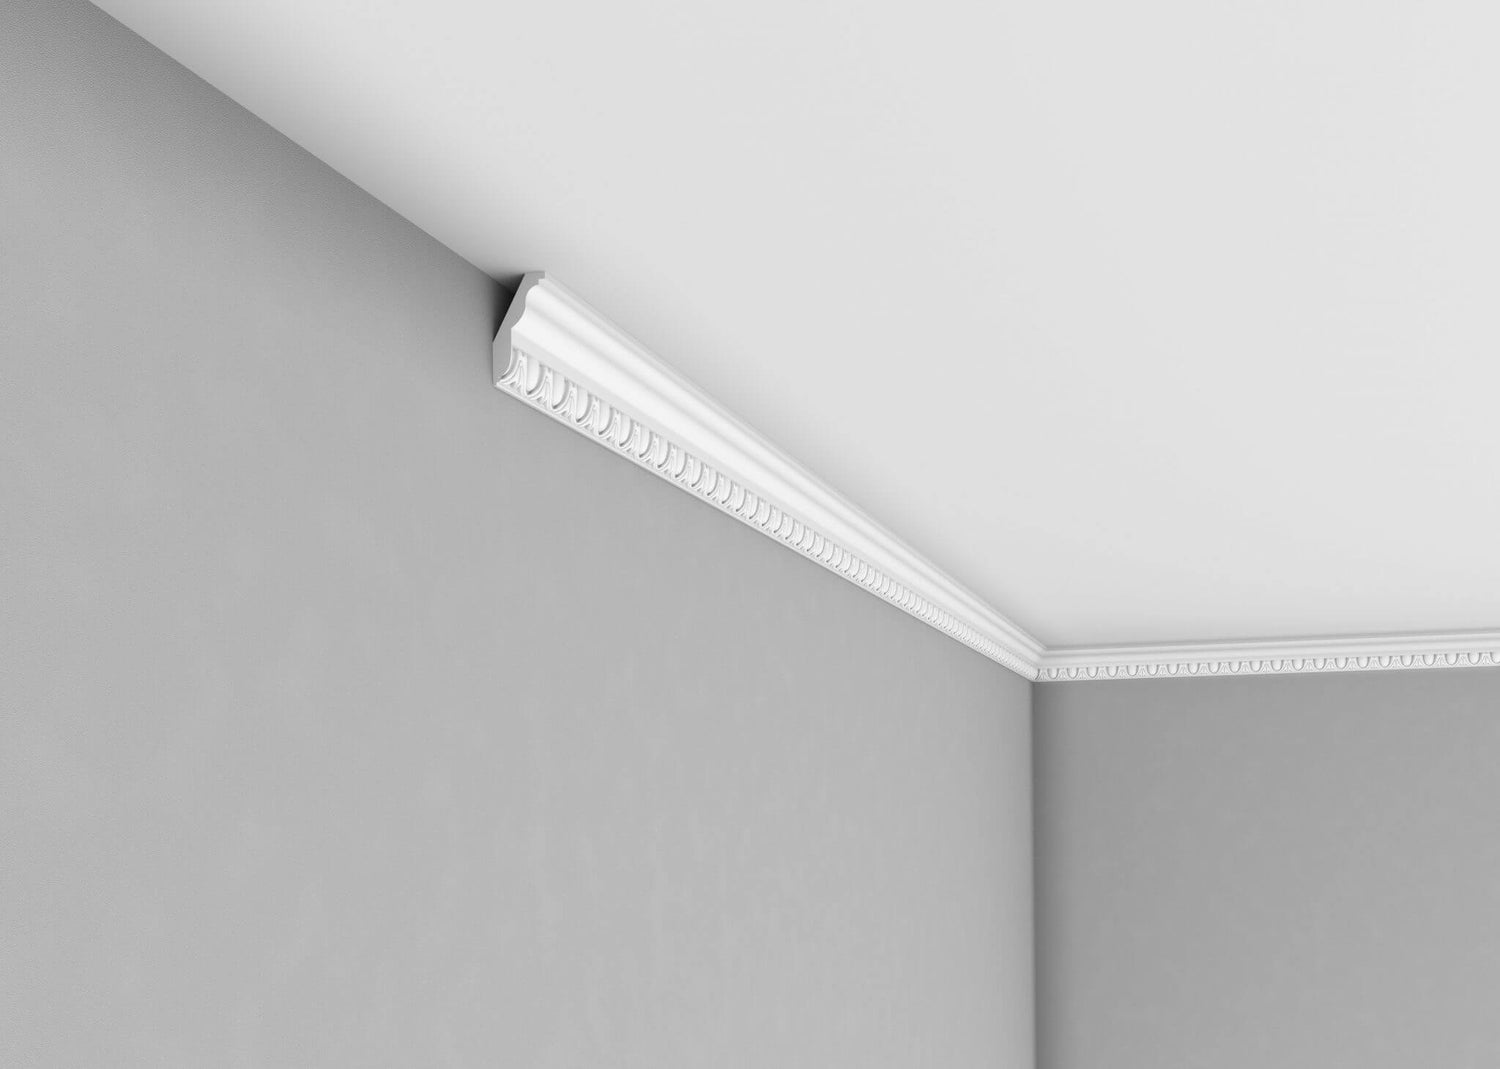 C3203 - Classic Coving installed